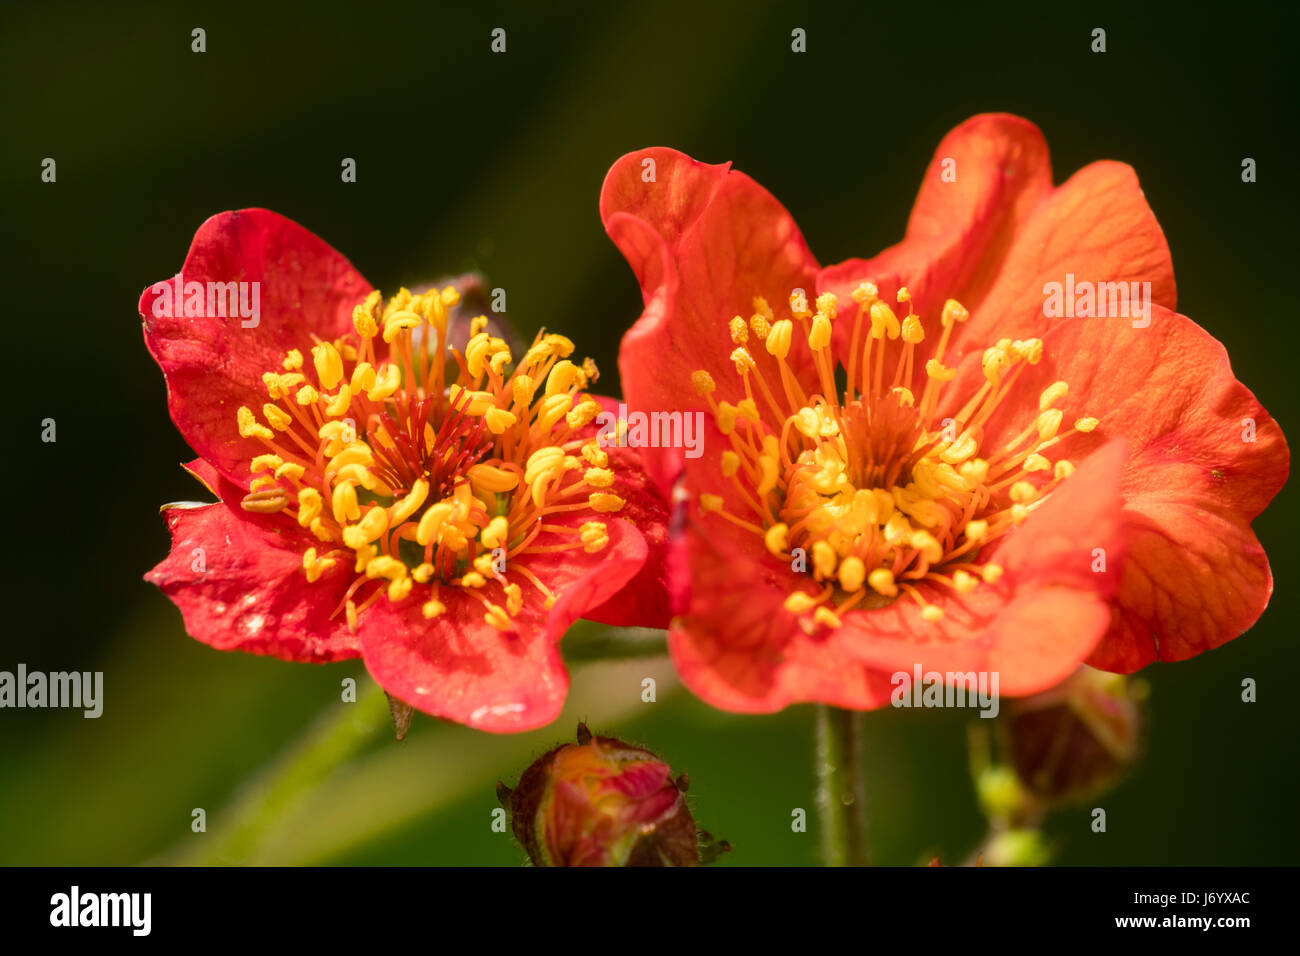 Red petals and contrasting yellow anthers distinguish the flowers of the wiry stemmed perennial, Geum magellanicum Stock Photo